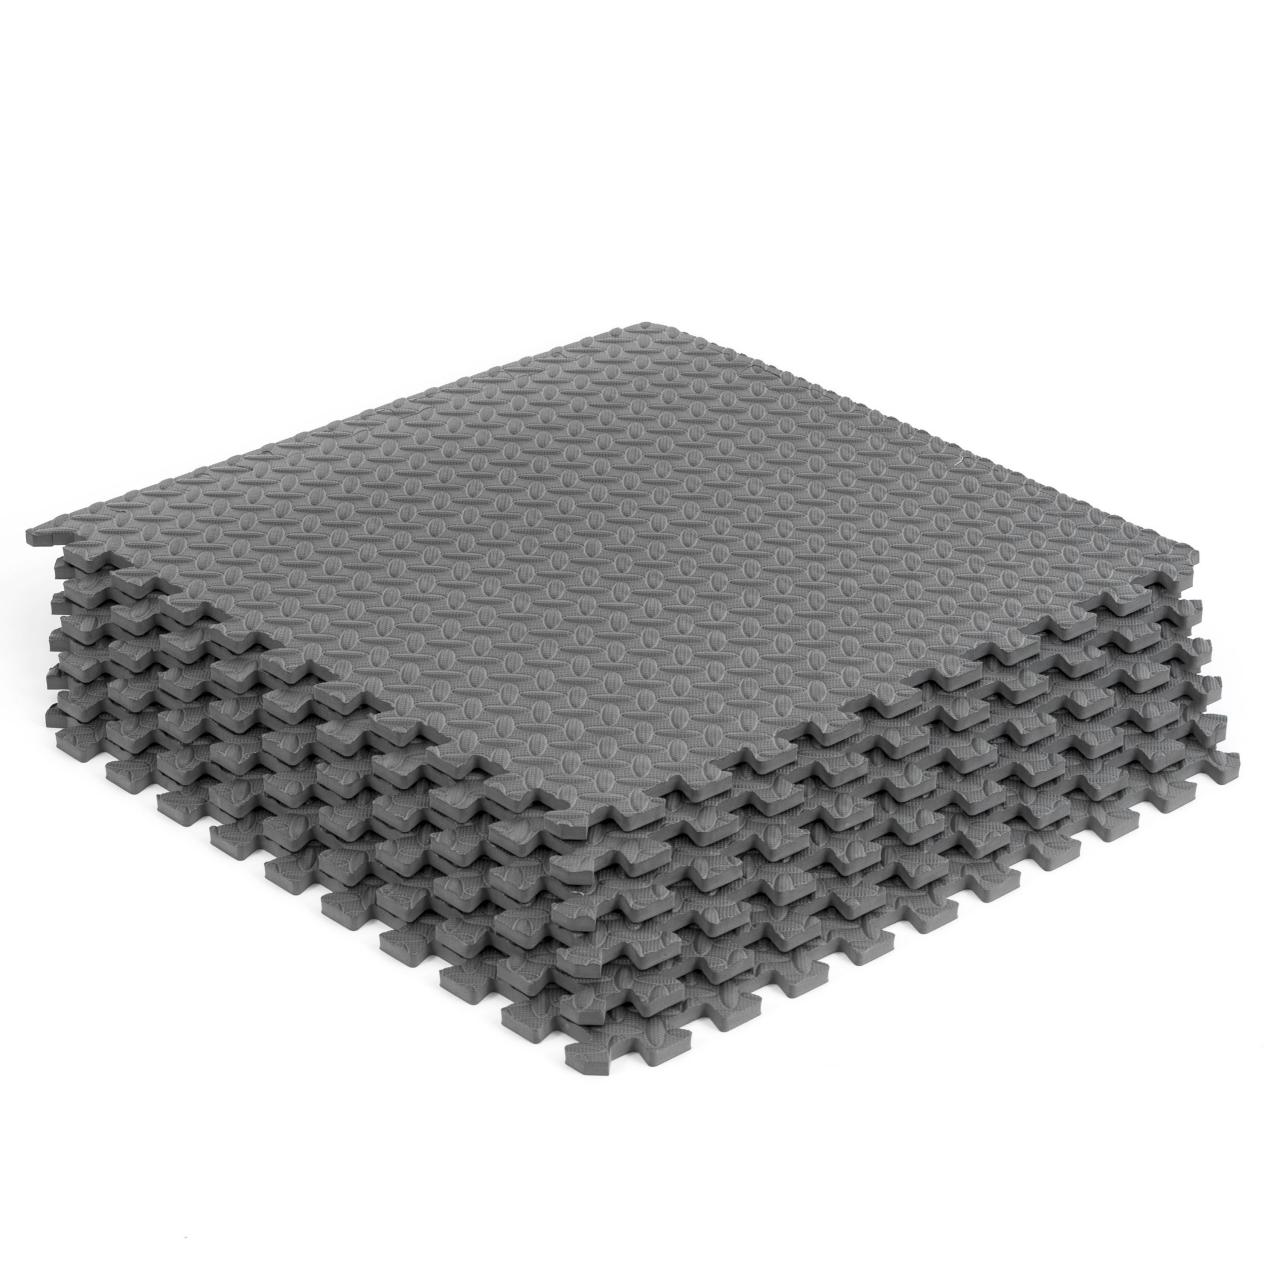 Review for ProsourceFit Puzzle Exercise Mat ½”, EVA Foam Interlocking Tiles  Protective Flooring for Gym Equipment and Cushion for Workouts